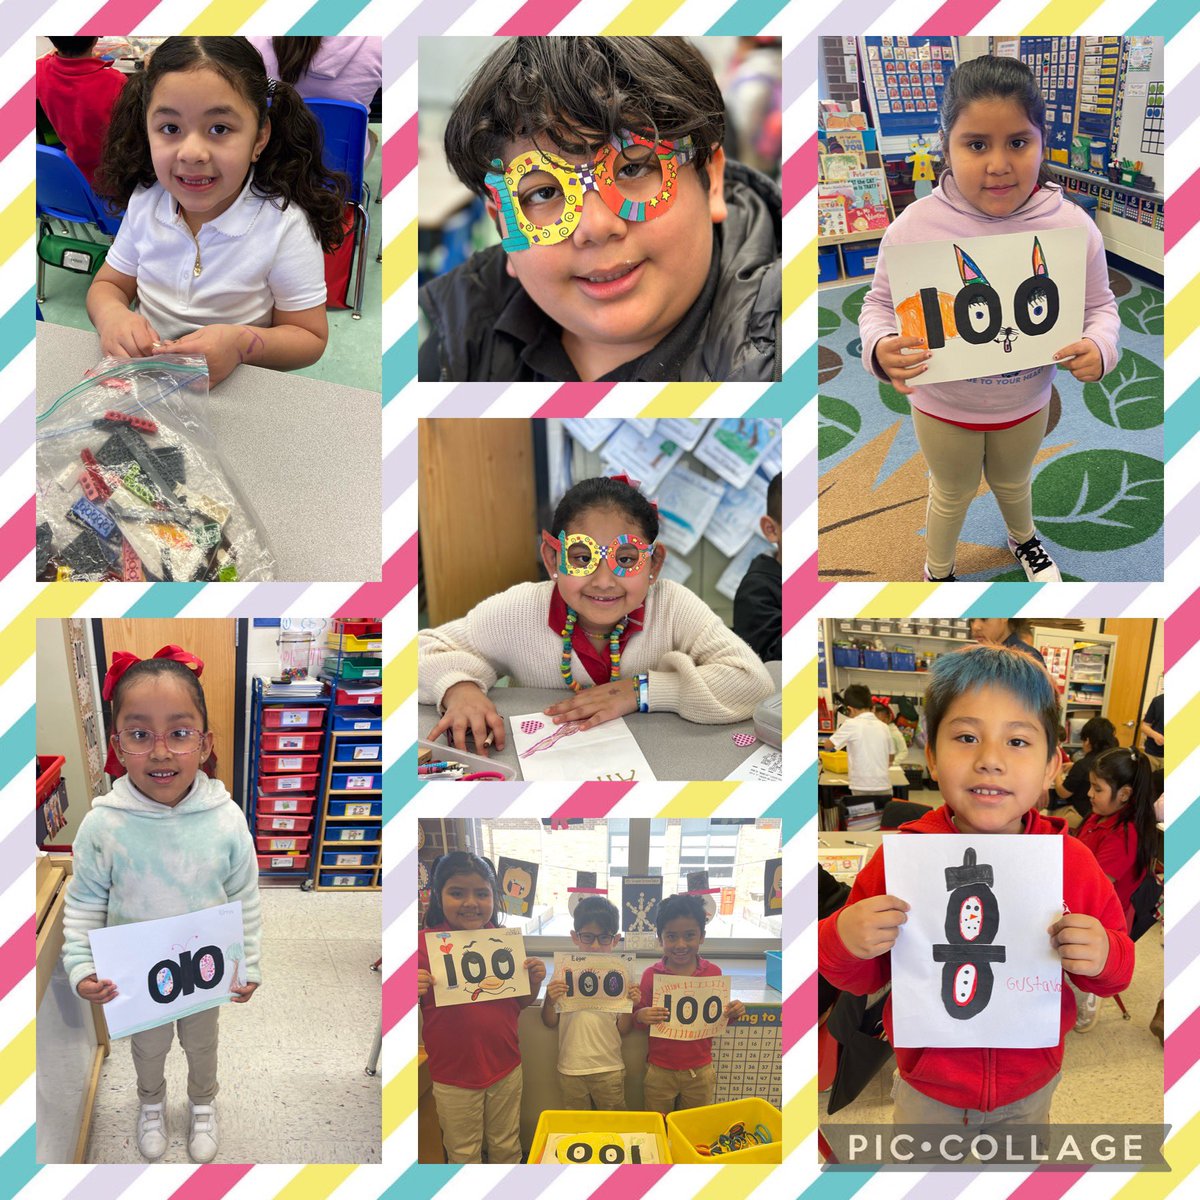 Today we had Valentine’s Day and 100th day festivities occurring in 1st grade! We shared in many moments of laughter, excitement, friendship and joy! @rbpsEAGLES #RBBisBIA